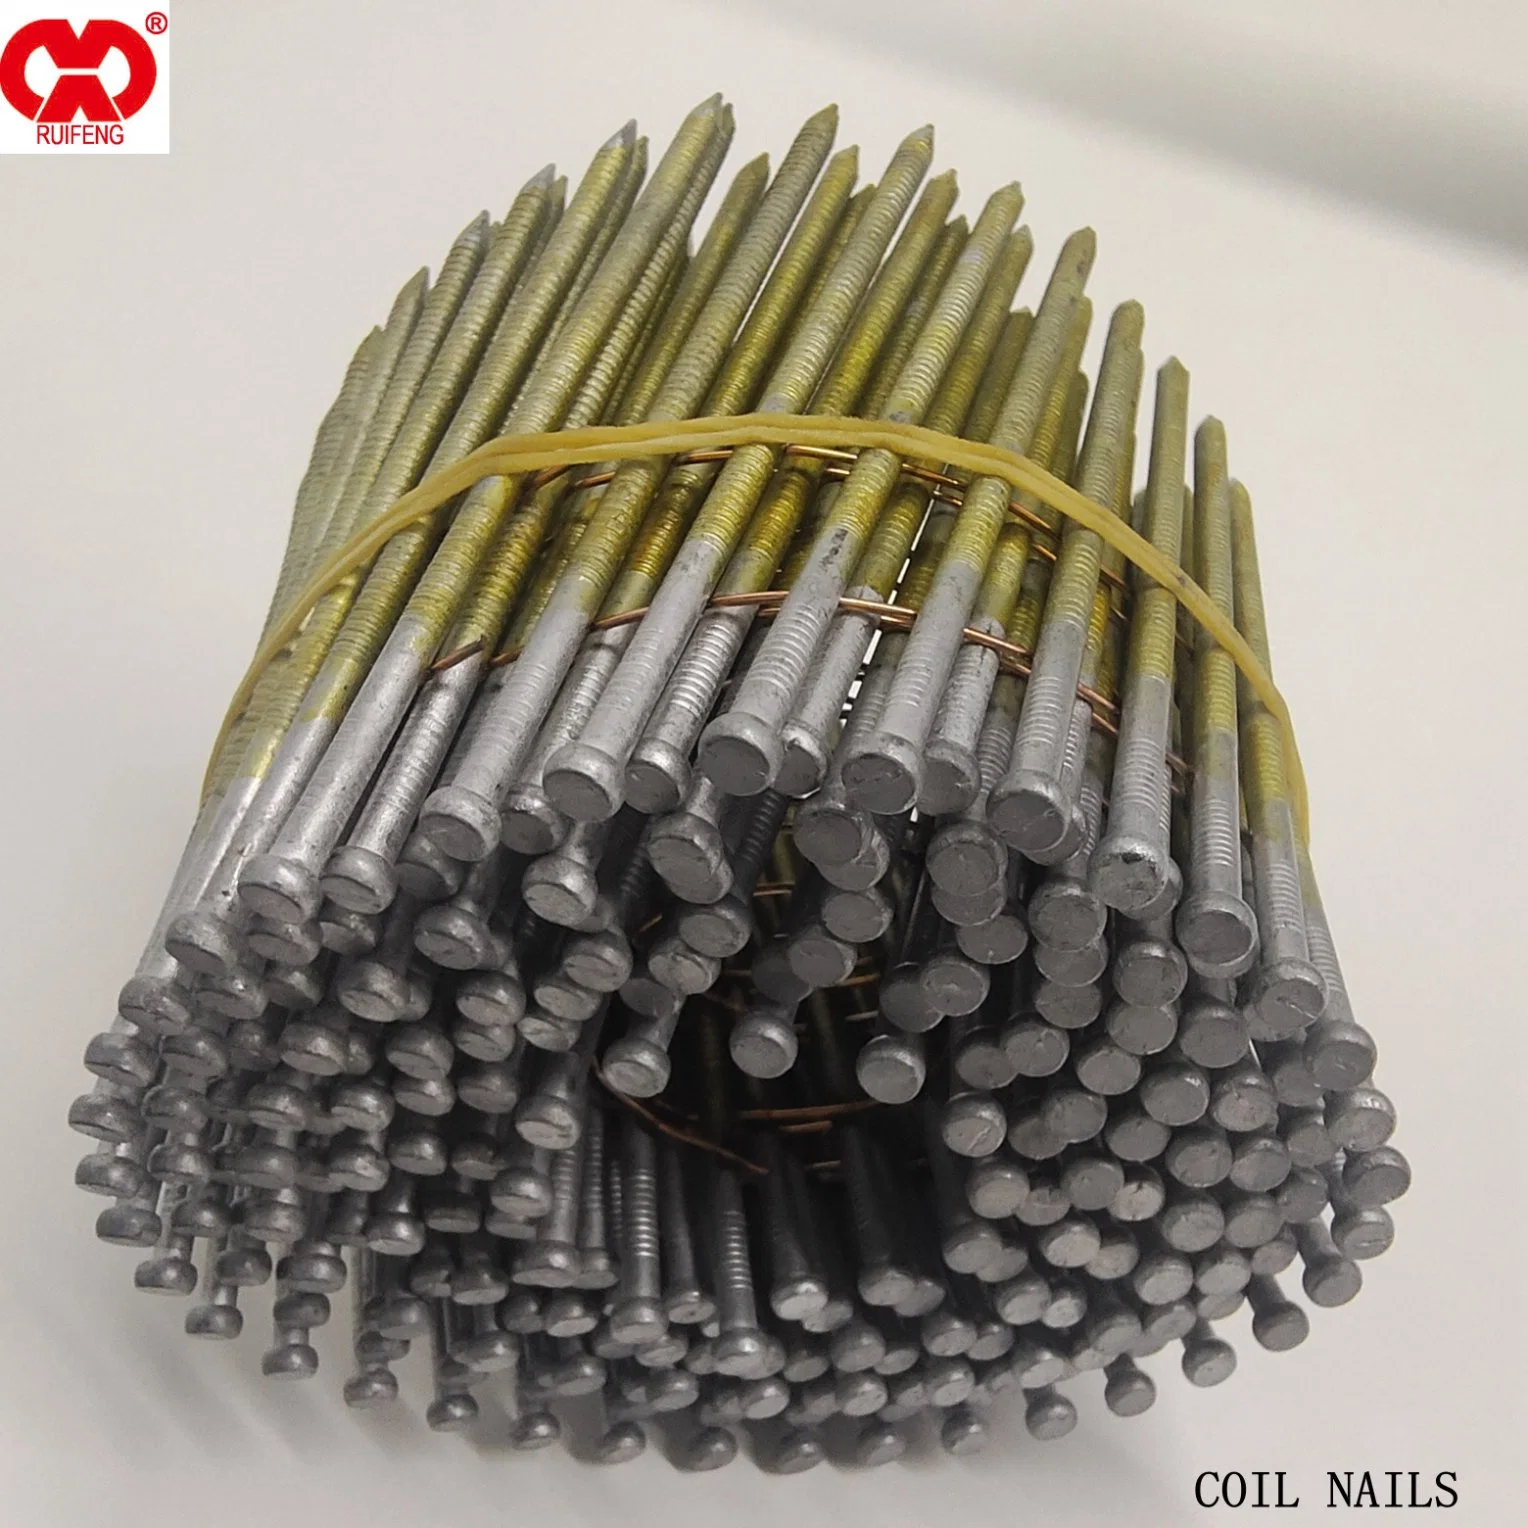 Latest Price Finish H. D. G. Wire Coil Nails, Dia 3.15mm Small Round Head Ring Shank Collated Nails in Anhui.